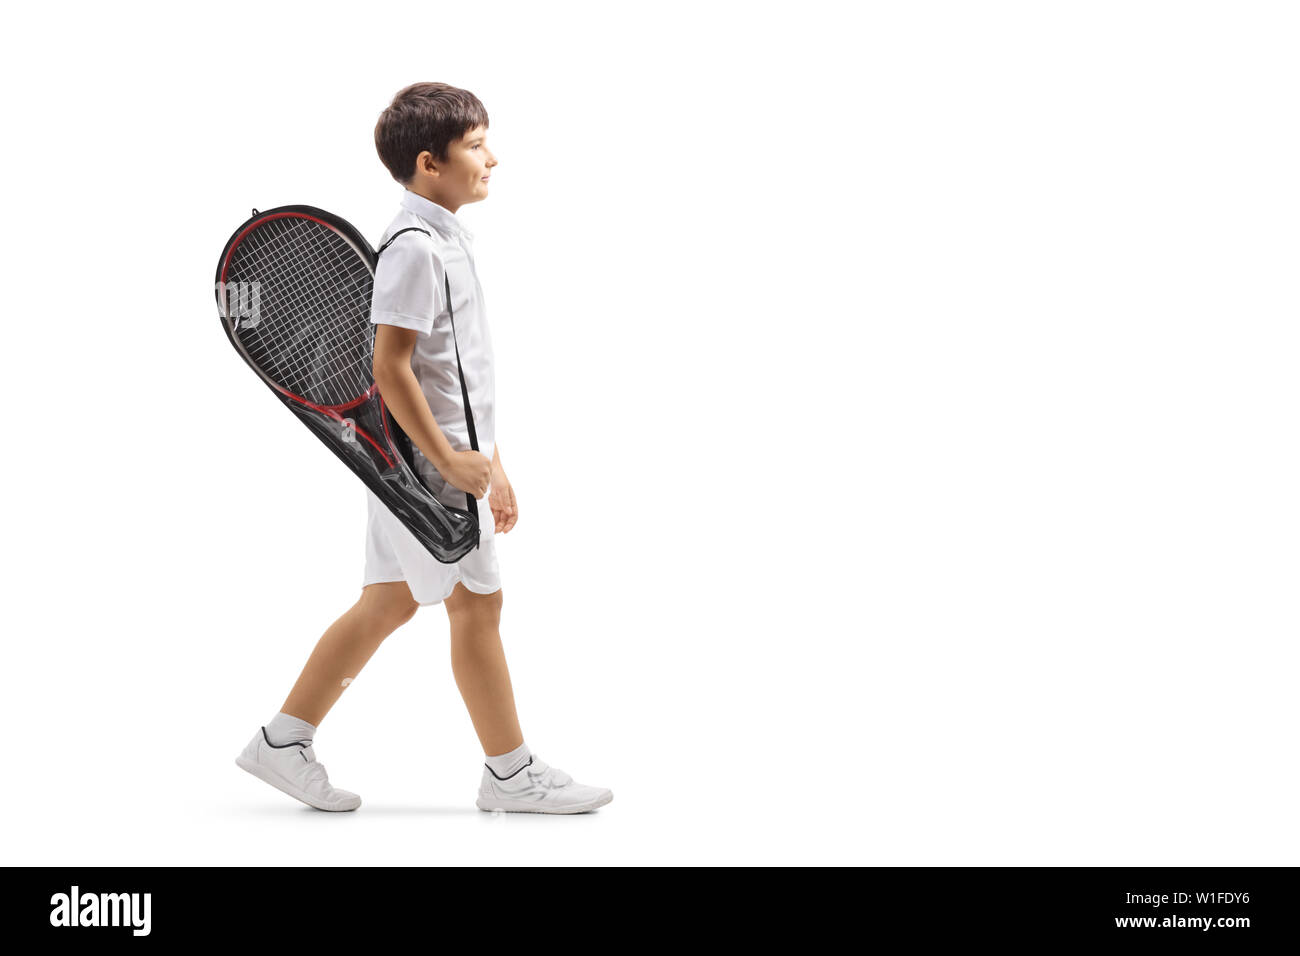 Full length profile shot of a boy walking with a tennis racket in a case isolated on white background Stock Photo